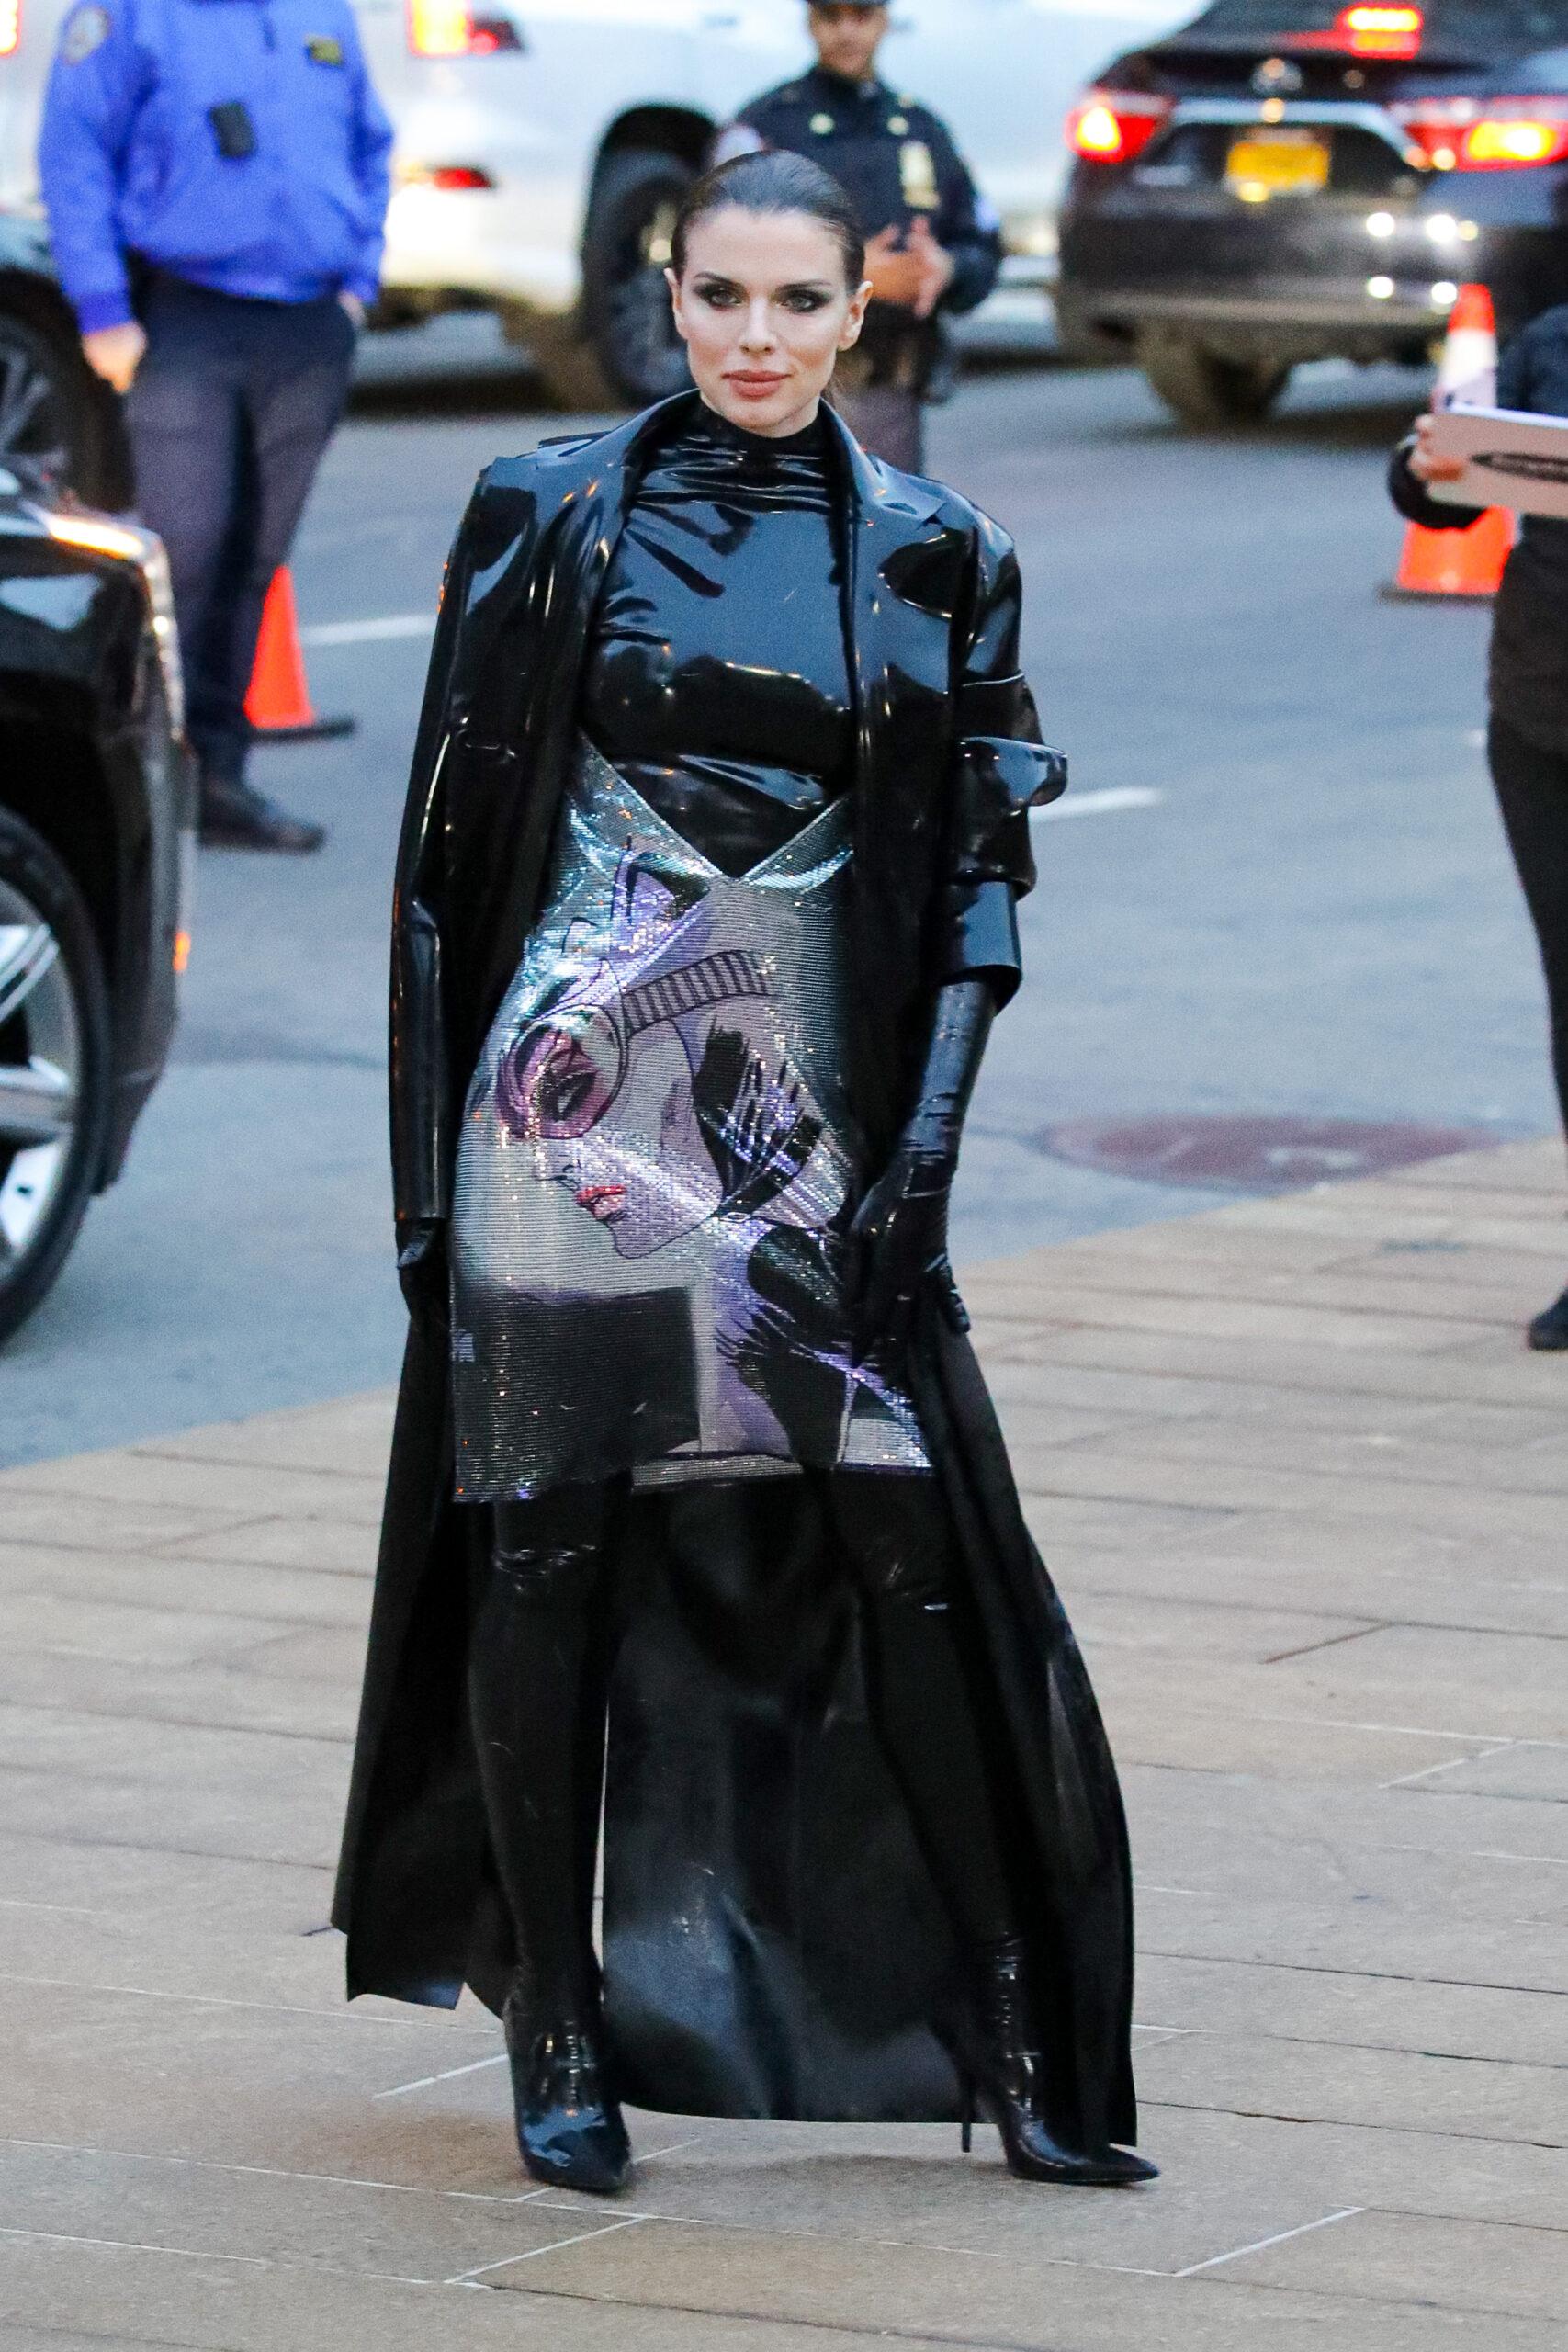 Julia Fox seen posing while attending at The Batman Premiere in New York City on Mar 01 2022